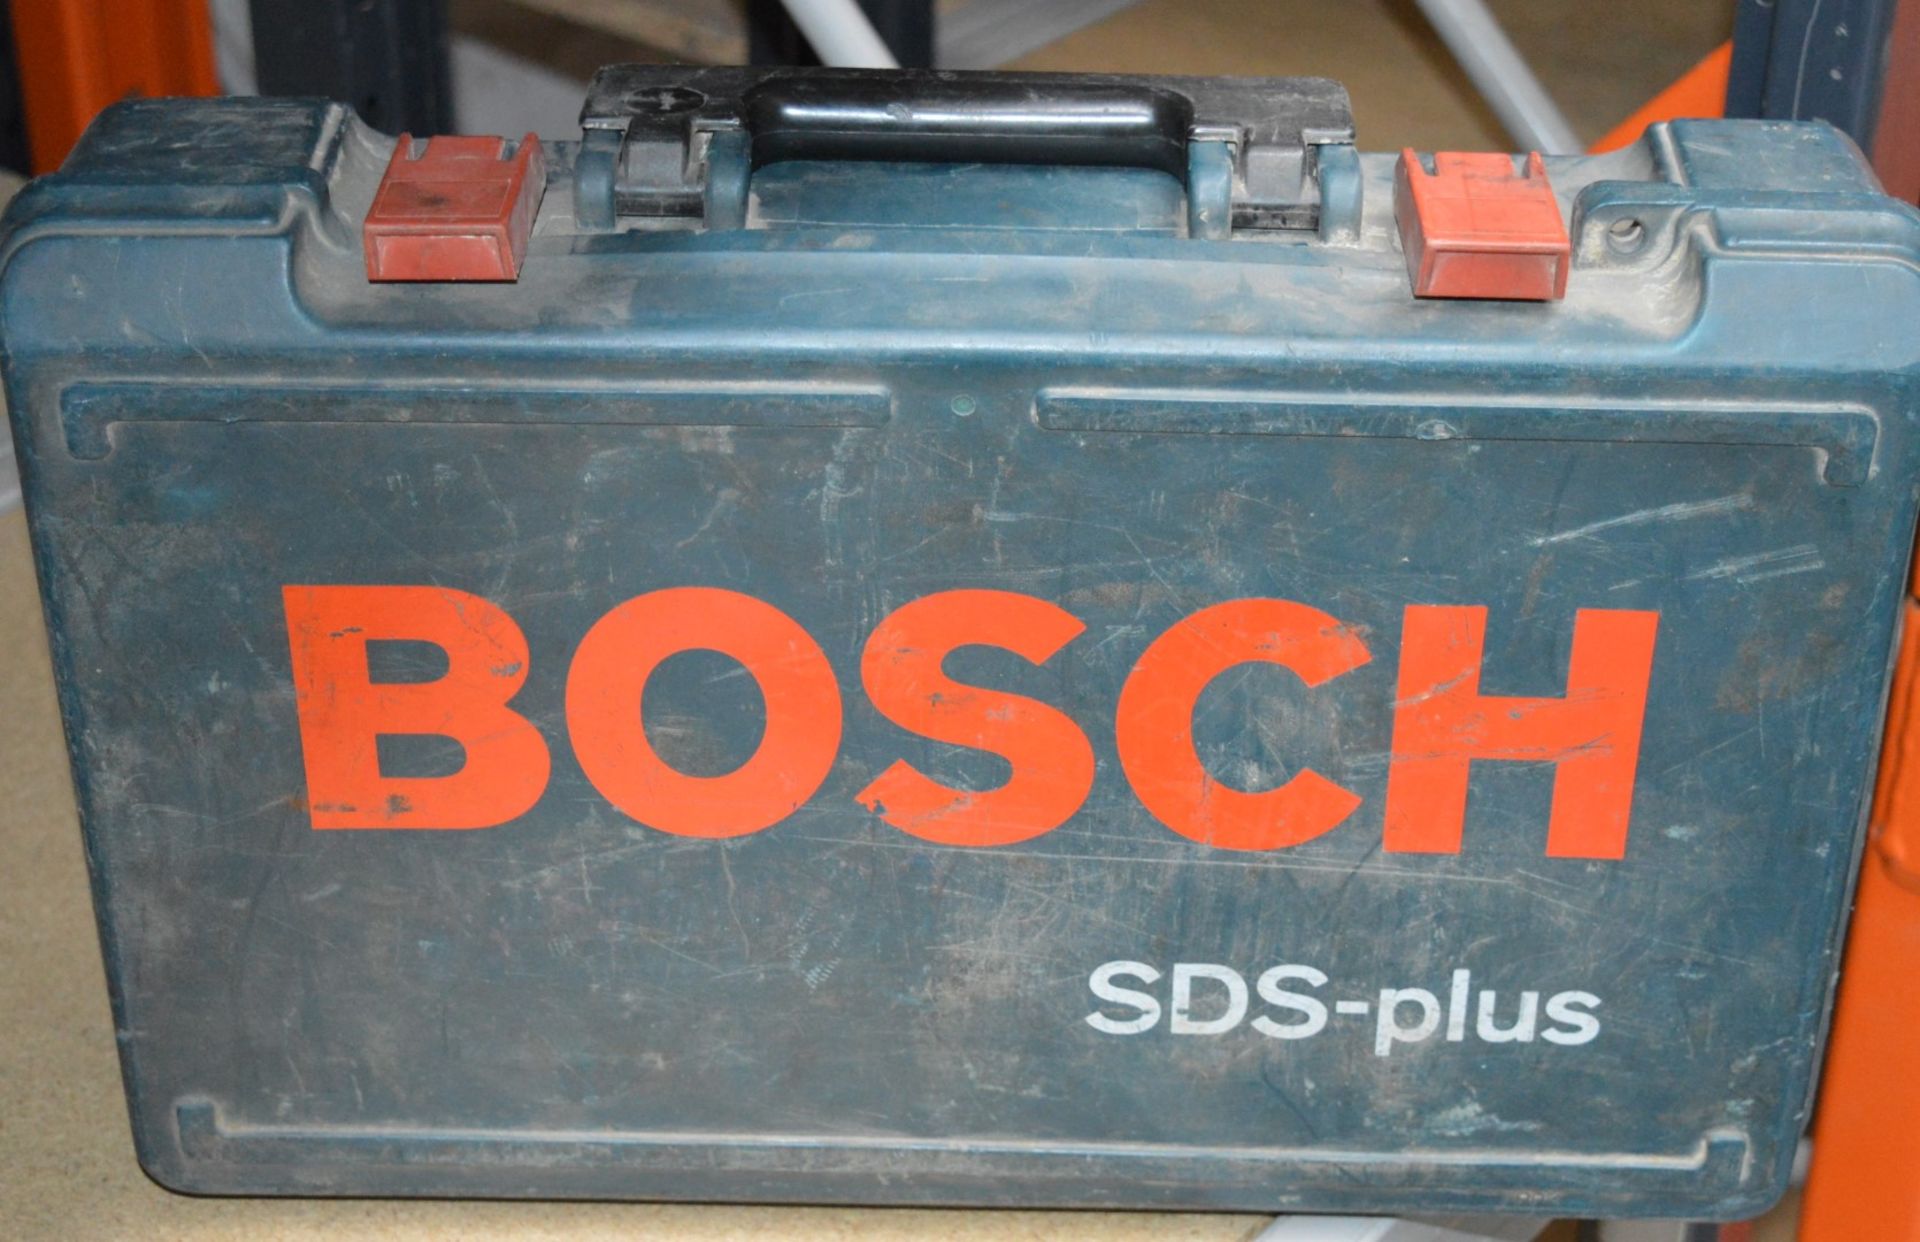 1 x Bosch Rotary Hammer Drill - 110v - Model GBH 2 SE - Includes Protective Case - Tested and - Image 3 of 3